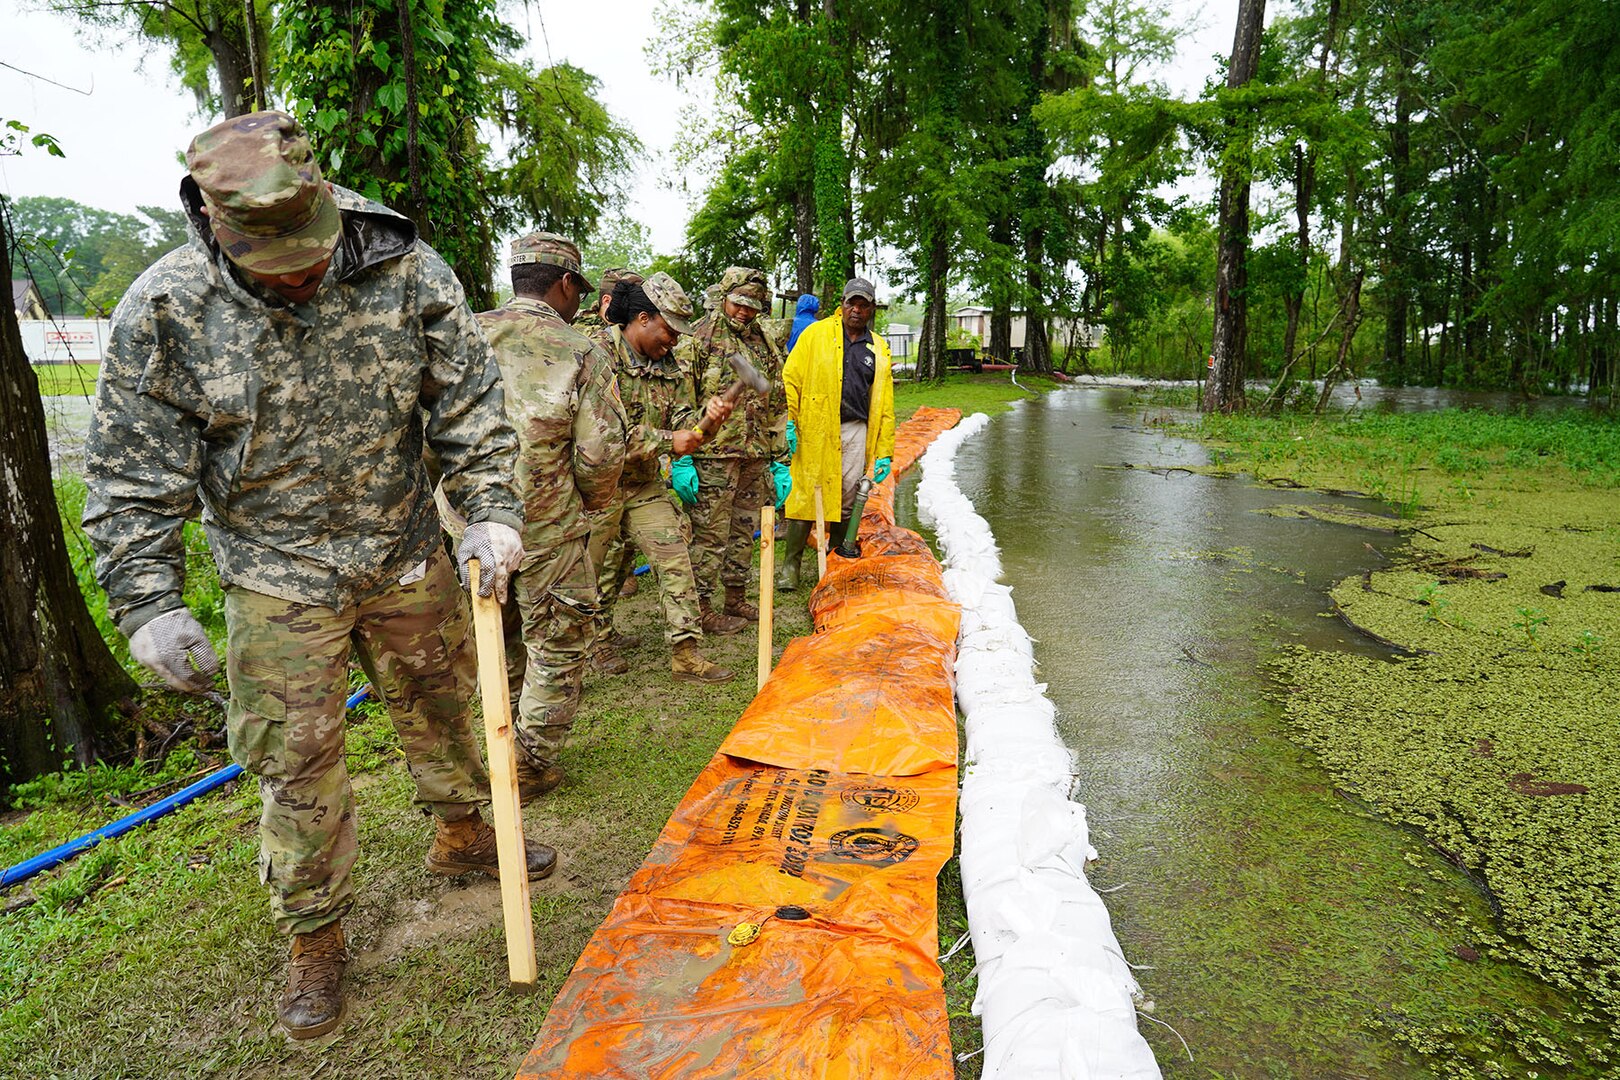 Louisiana National Guardsmen deliver and set up a Tiger Dam system, a series of water-filled tubes that create a barrier to mitigate flooding, while assisting local and state officials in combating rising floodwaters in Pierre Part, La., May 21, 2021.